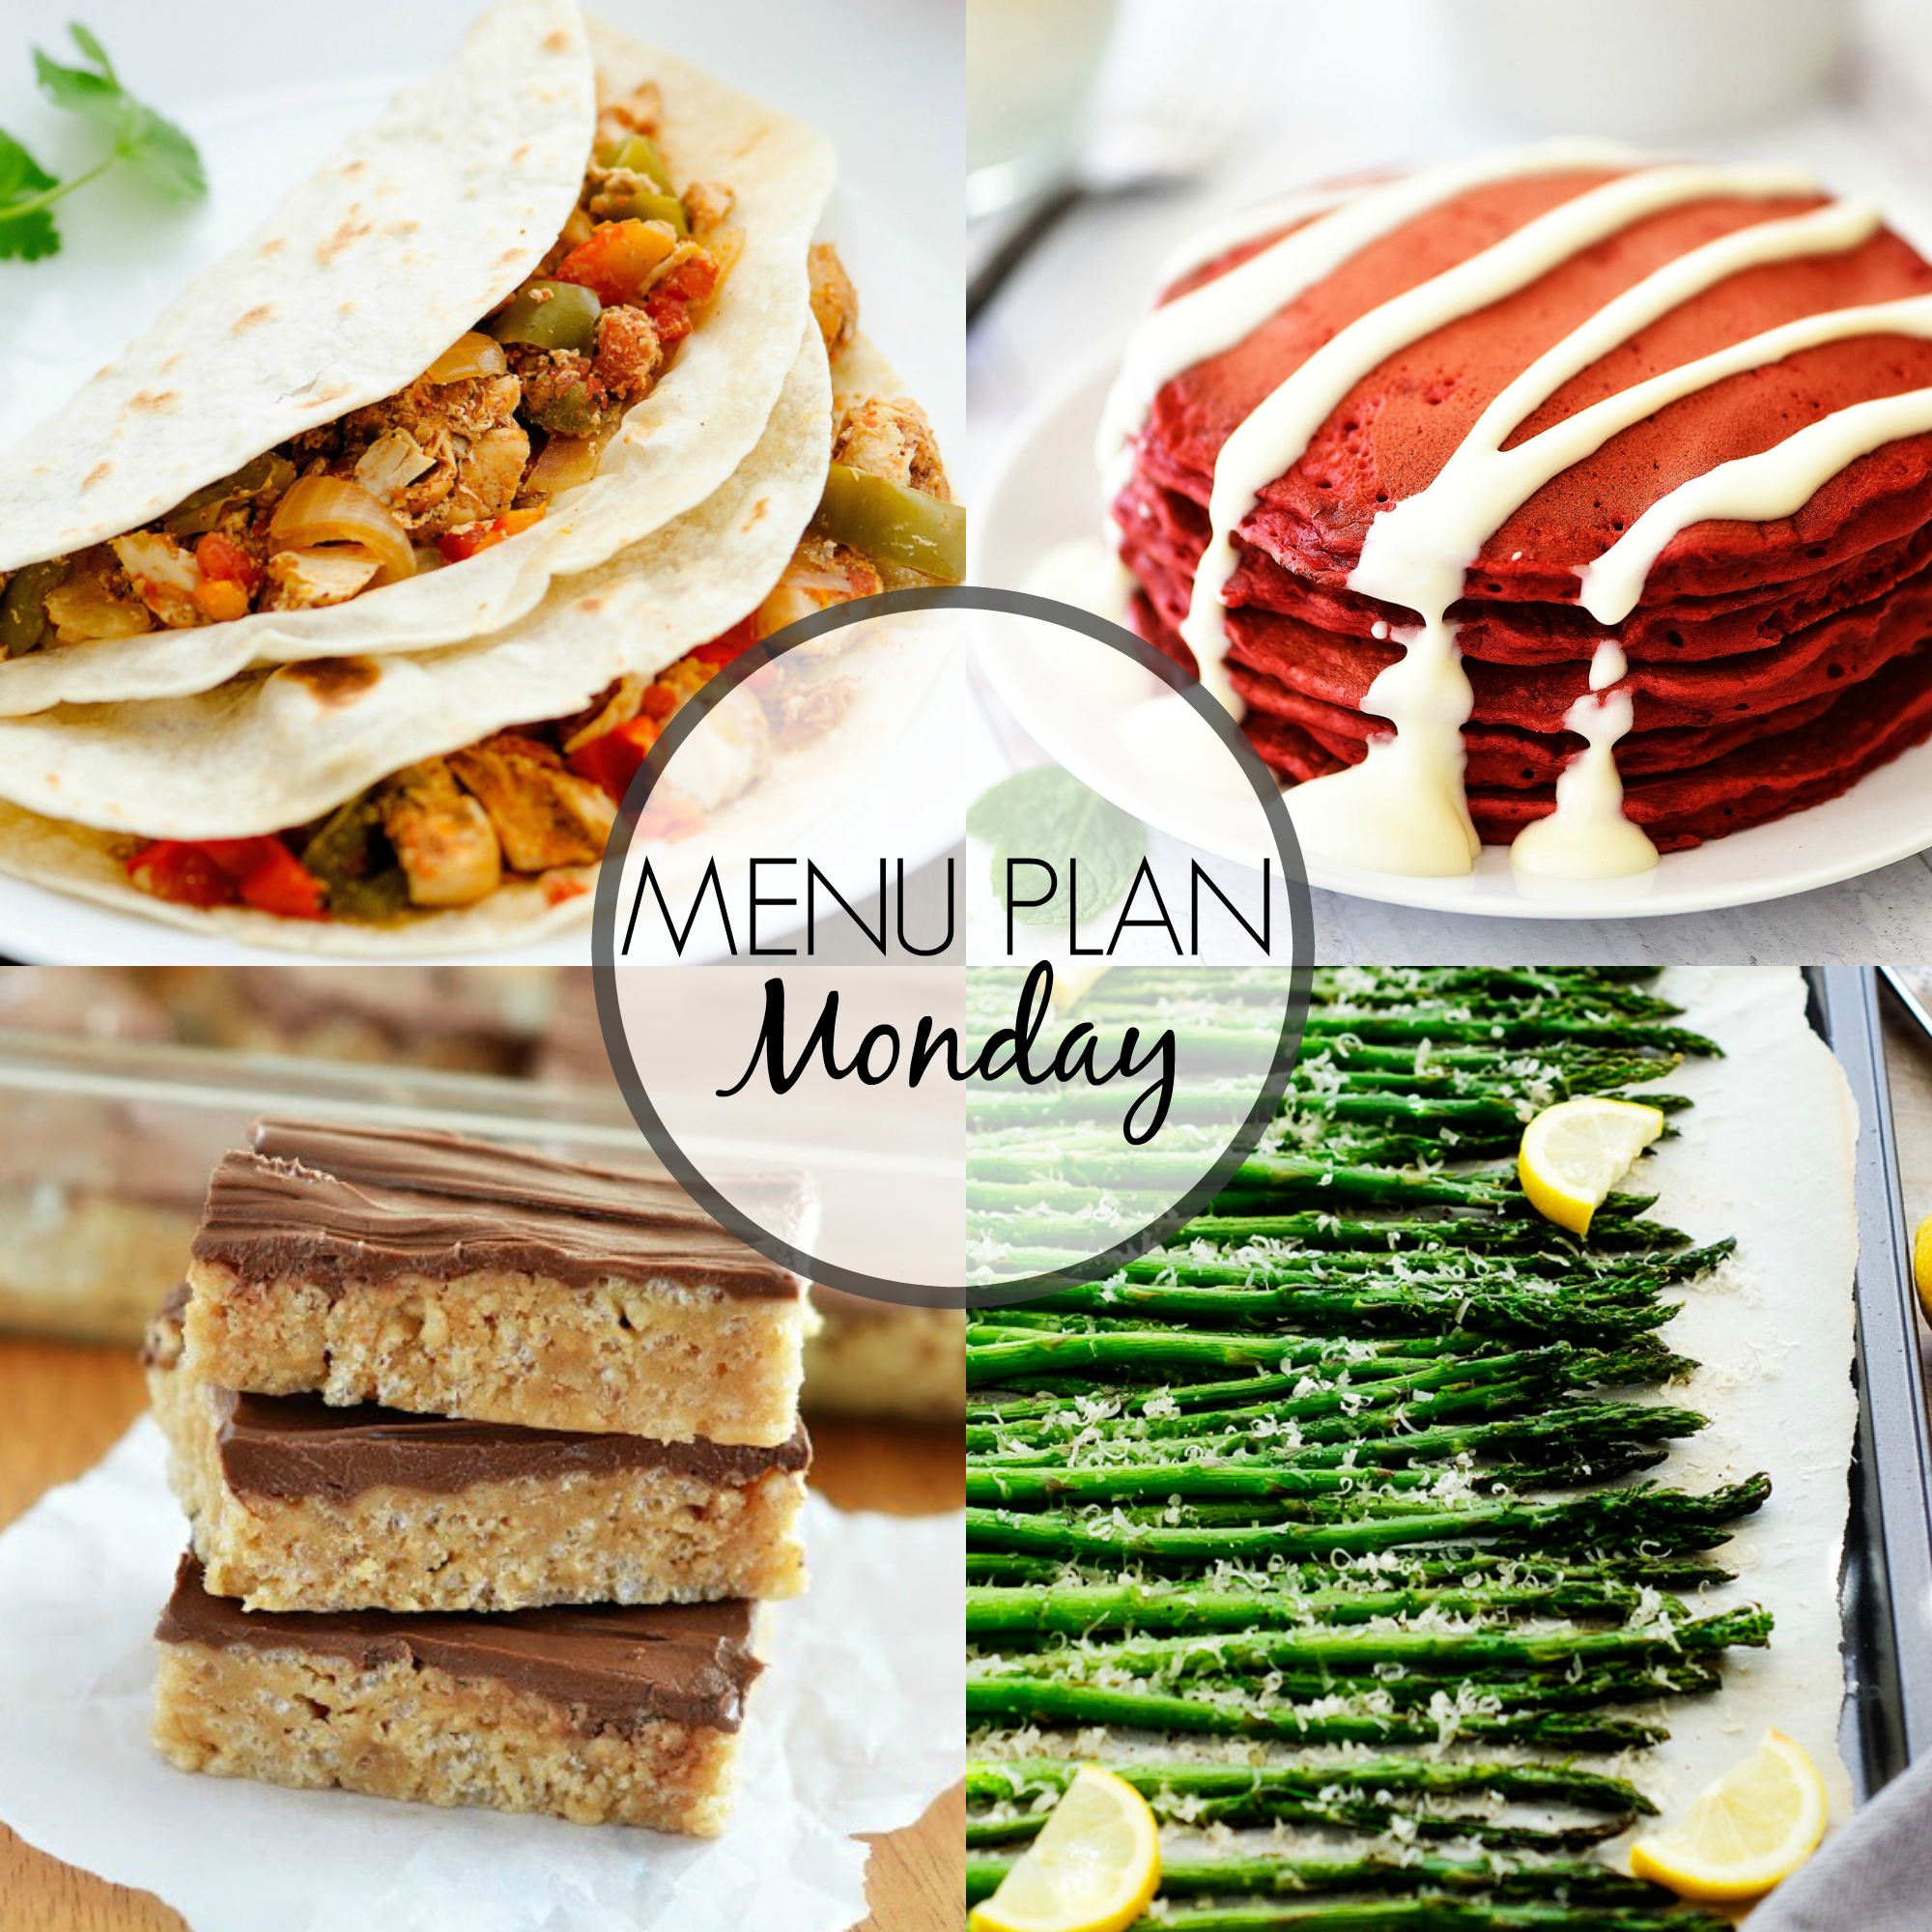 Menu Plan Monday is a list of dinner recipes. Each menu includes six dinner ideas and one dessert. Life-in-the-Lofthouse.com